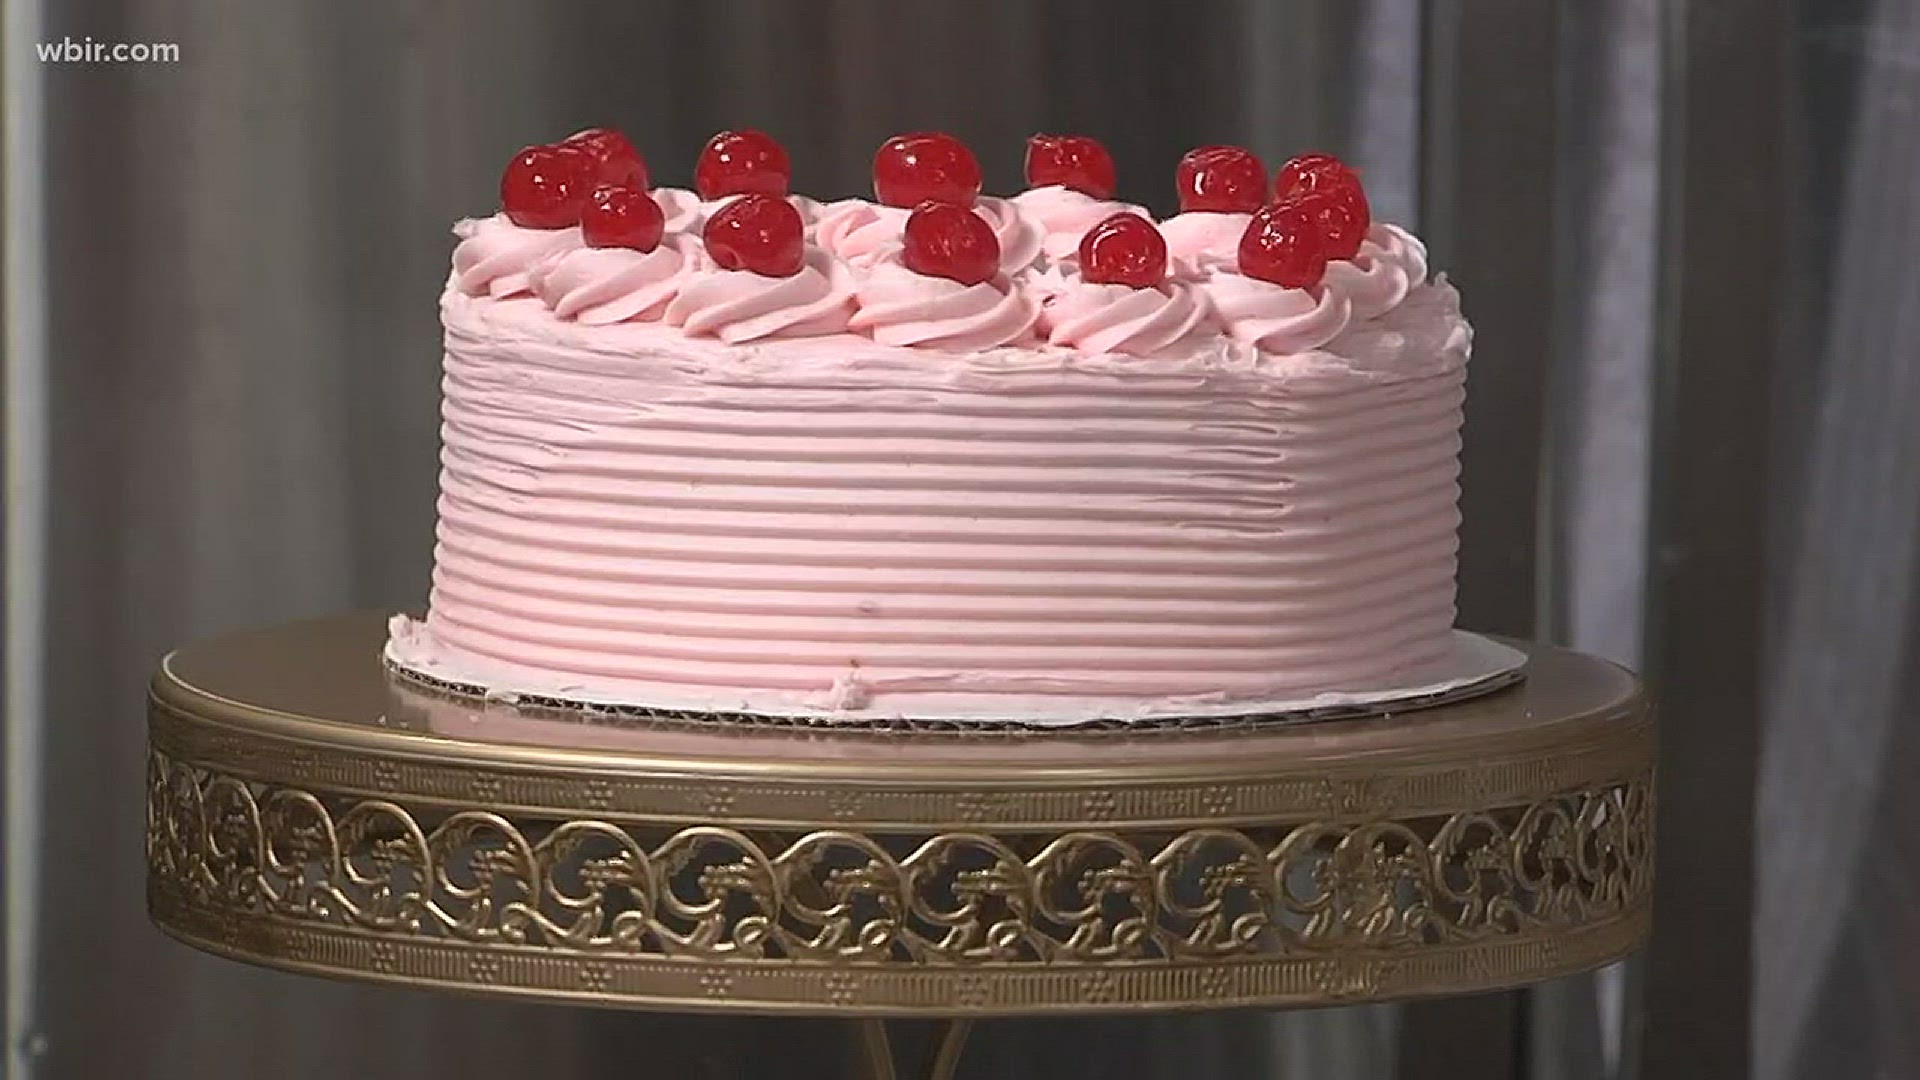 Betty Henry with B&G Catering whips up a Maraschino Cherry Cake with Brandon to celebrate spring.